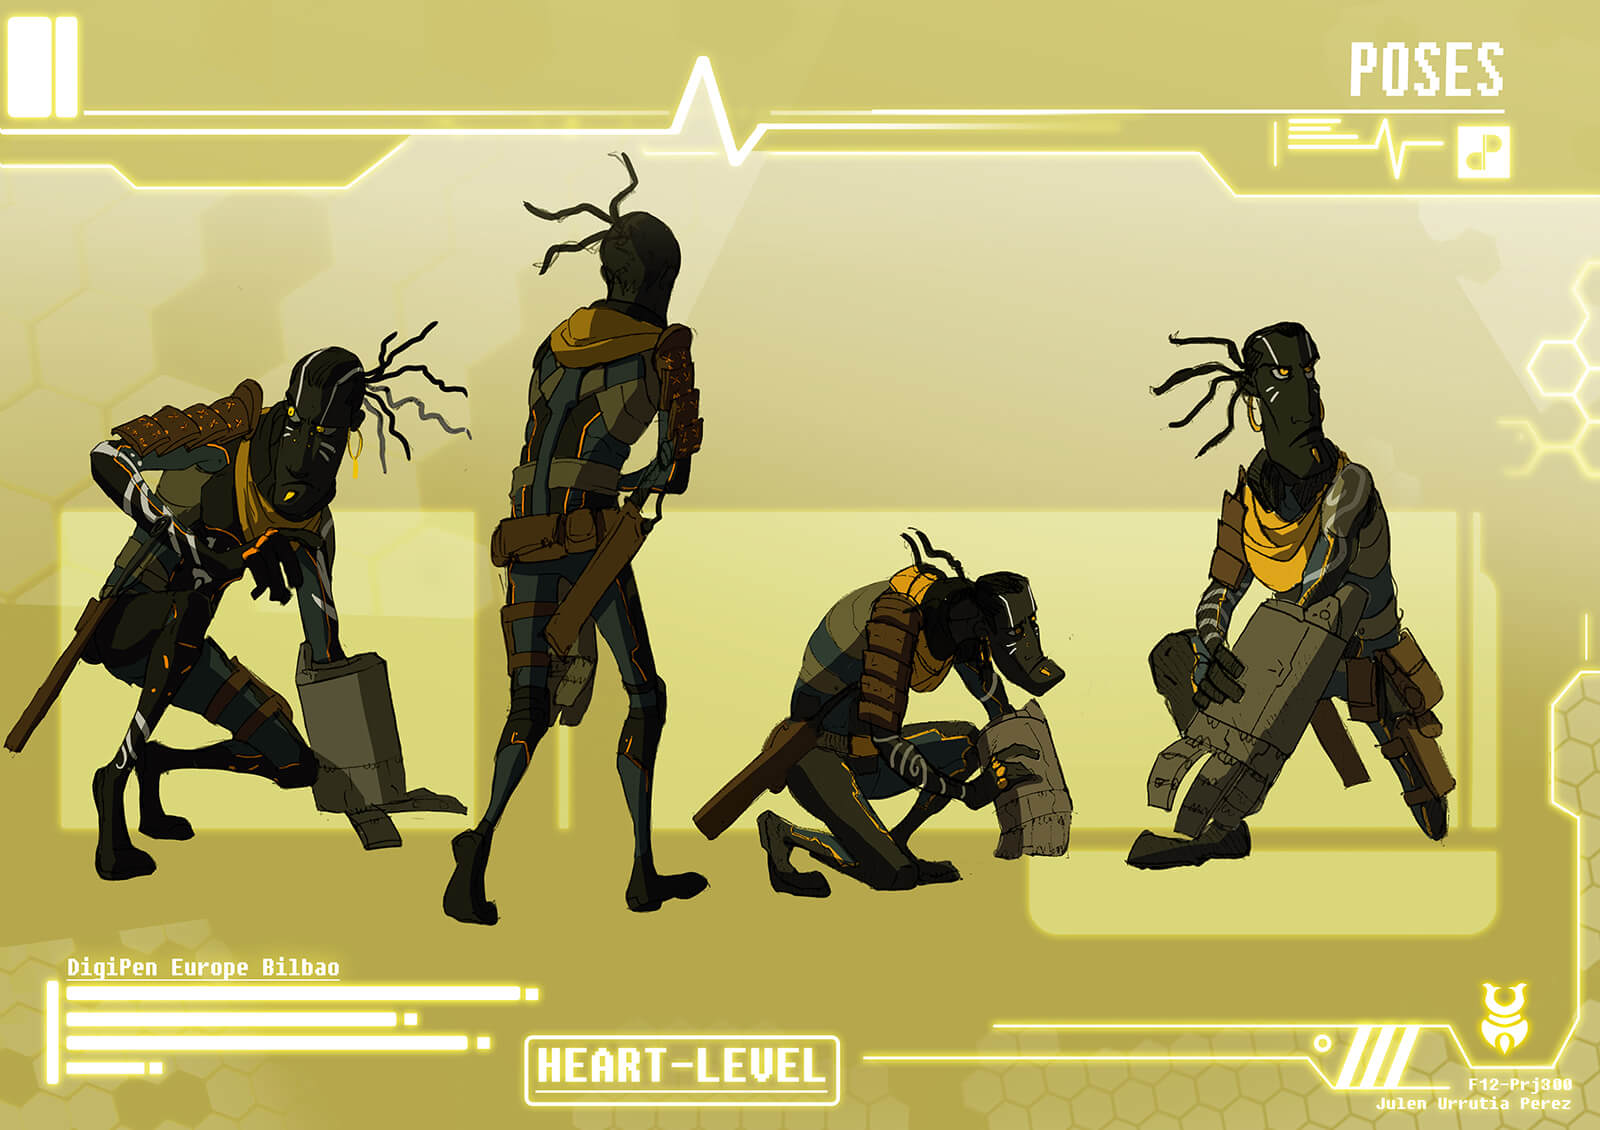 Full-color drawings of a tall, thin man in earth-tone body armor in poses such as walking and crouching